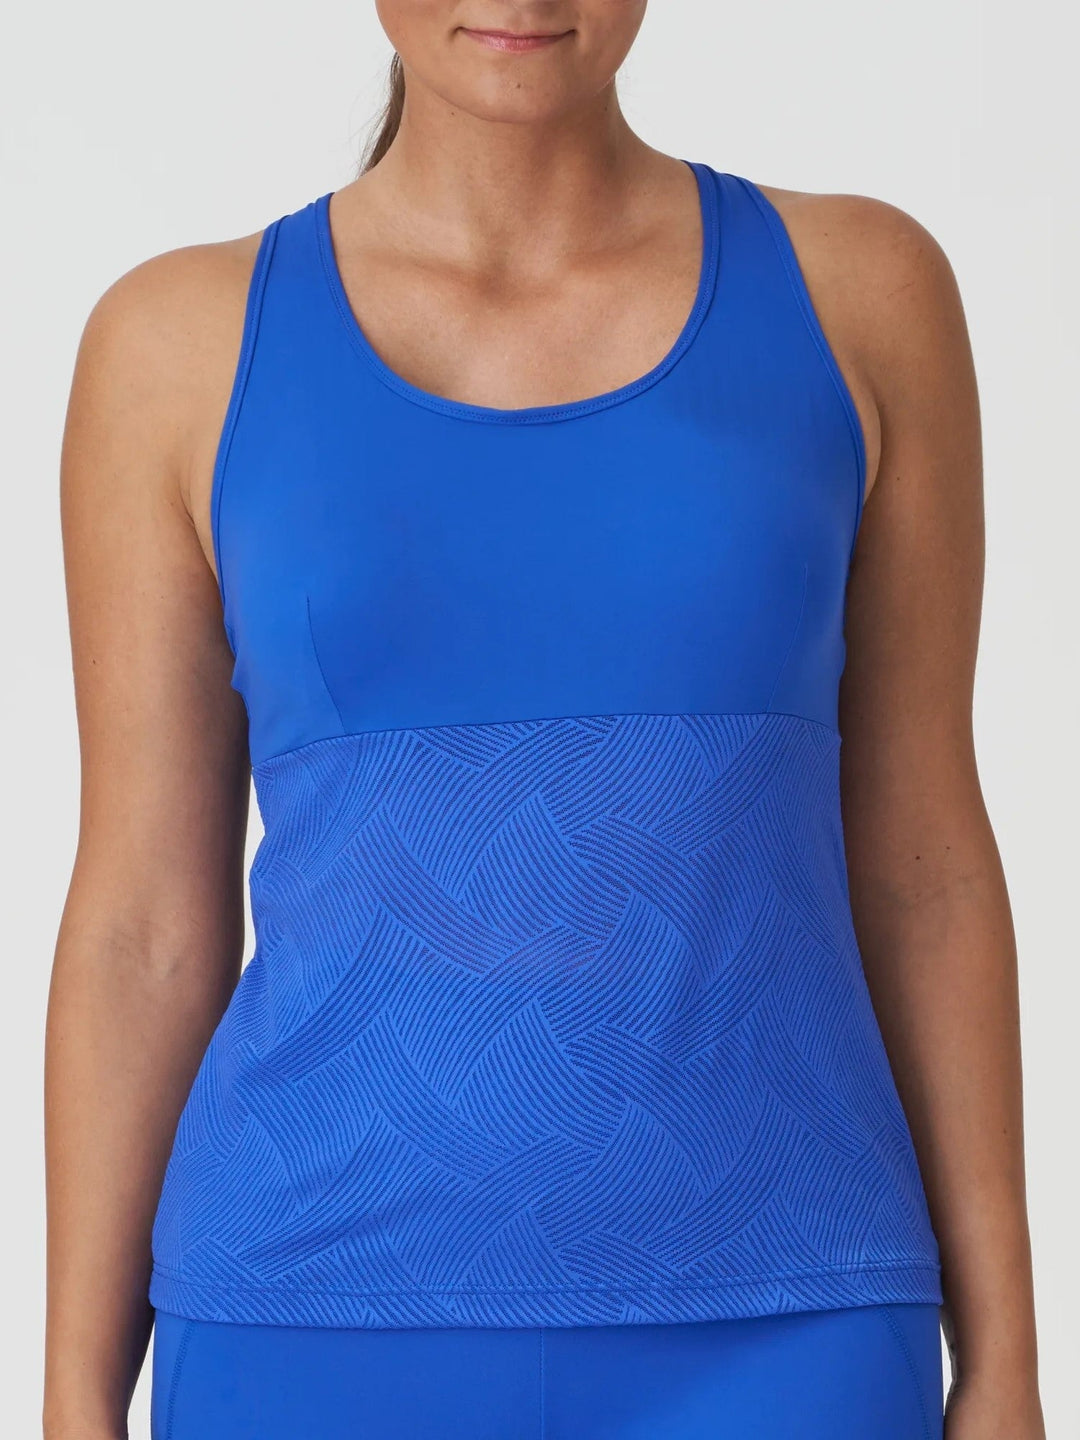 PrimaDonna Sport The Game Tank Top - Electric Blue Tank Top PrimaDonna Sport 